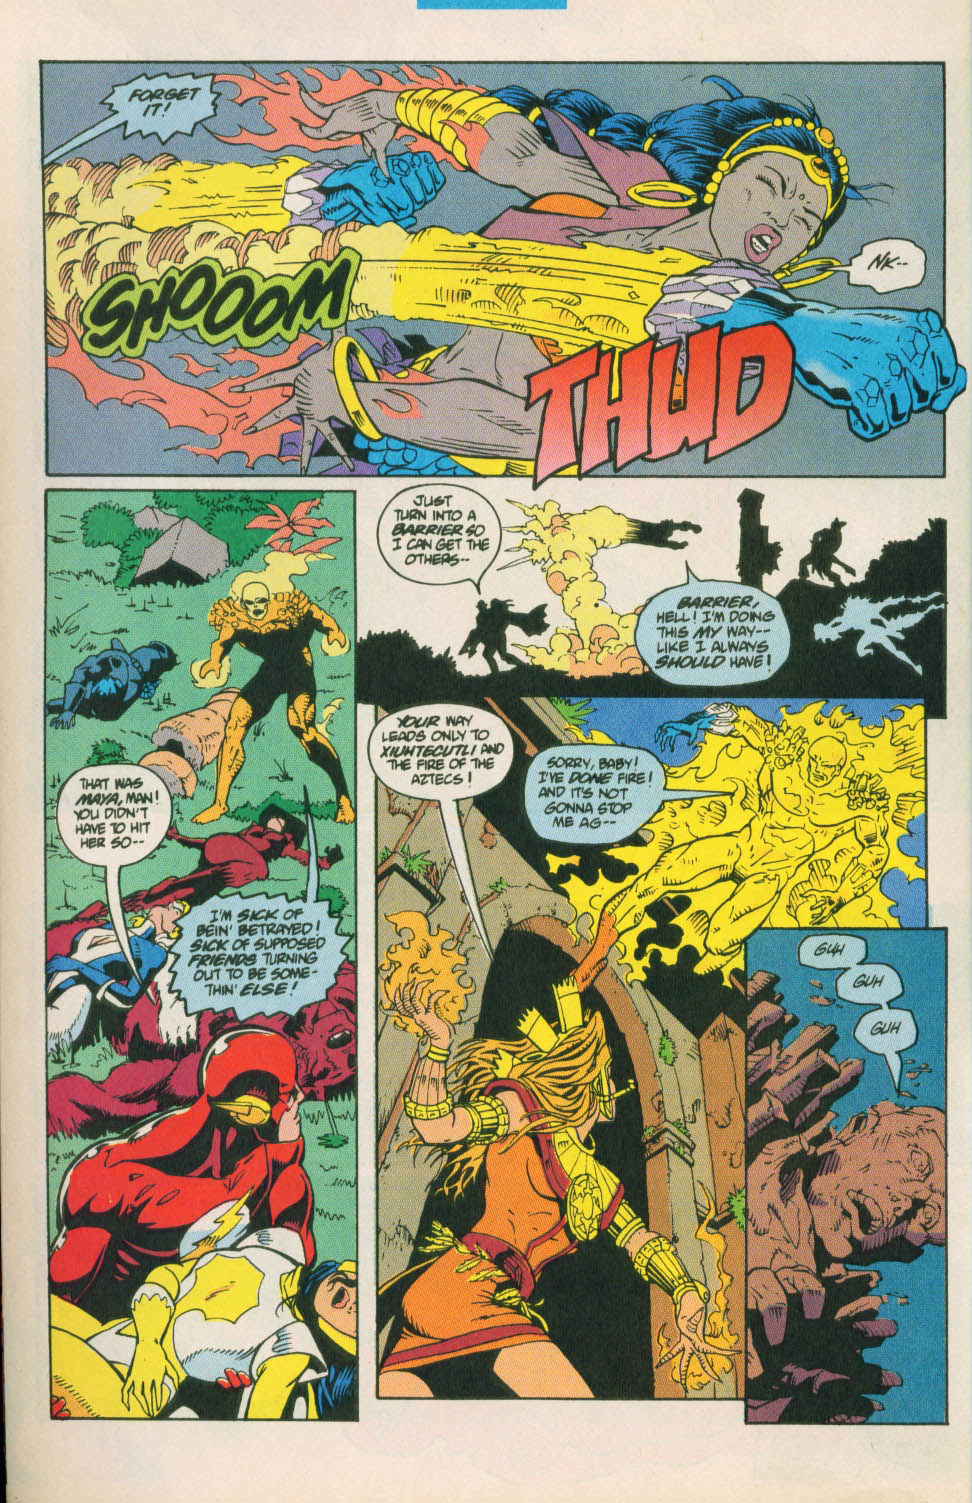 Justice League International (1993) 64 Page 4